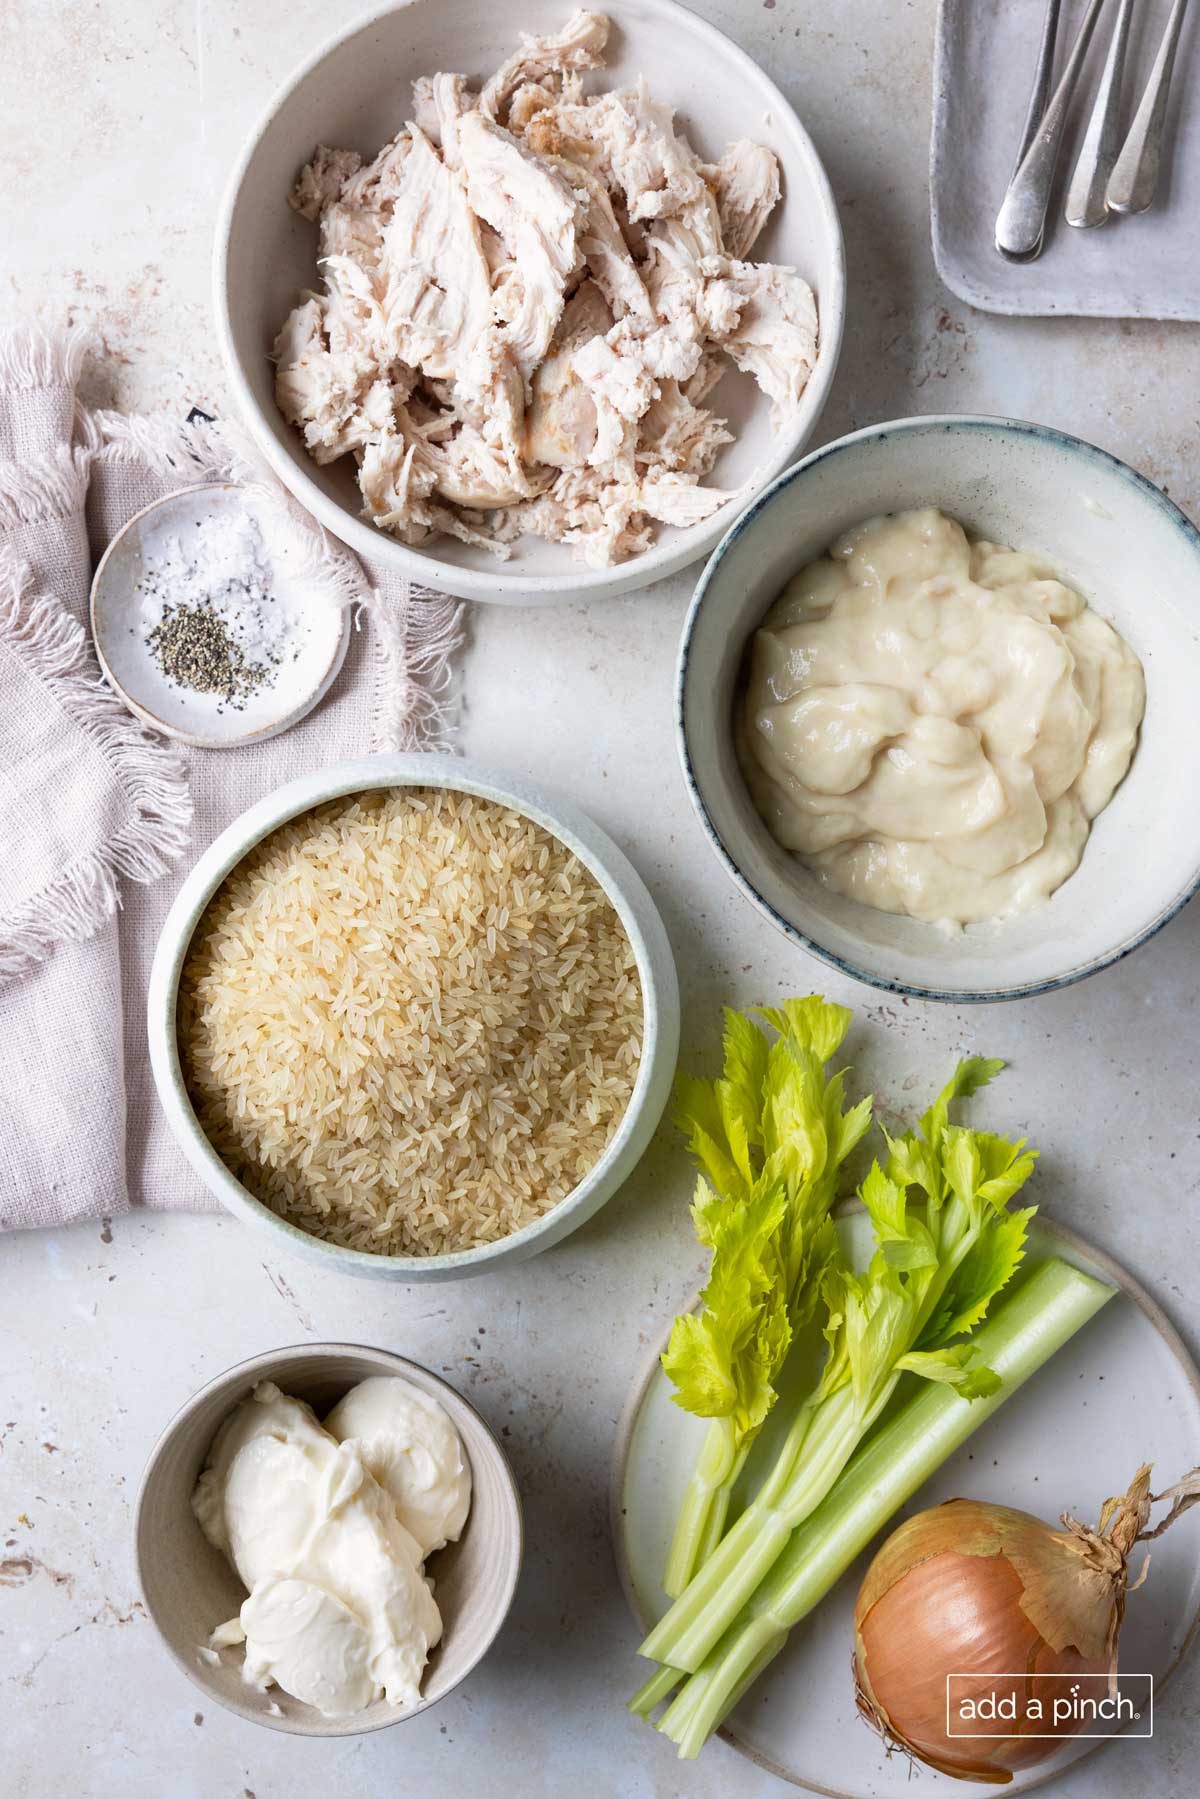 Photo of ingredients used to make chicken and rice casserole.